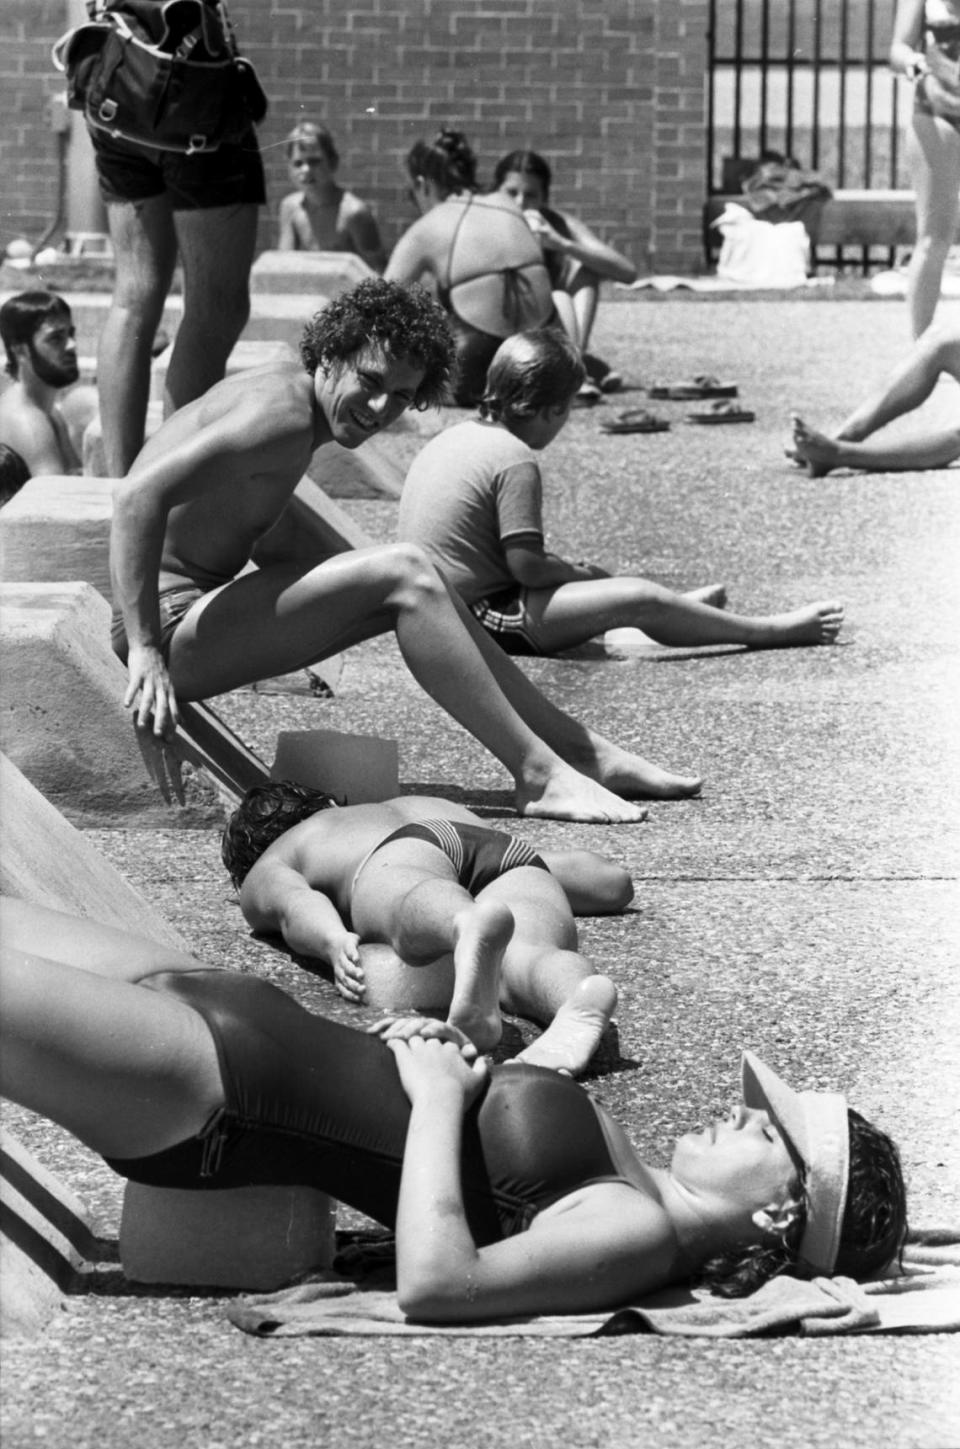 June 27, 1980: University of Texas at Arlington students attempt to melt 10-pound blocks of ice during a contest at the Non-Invitational Belly Flop and George Hamilton Tan Competition. Jerry Hoefer/Fort Worth Star-Telegram archives/UT Arlington Special Collections